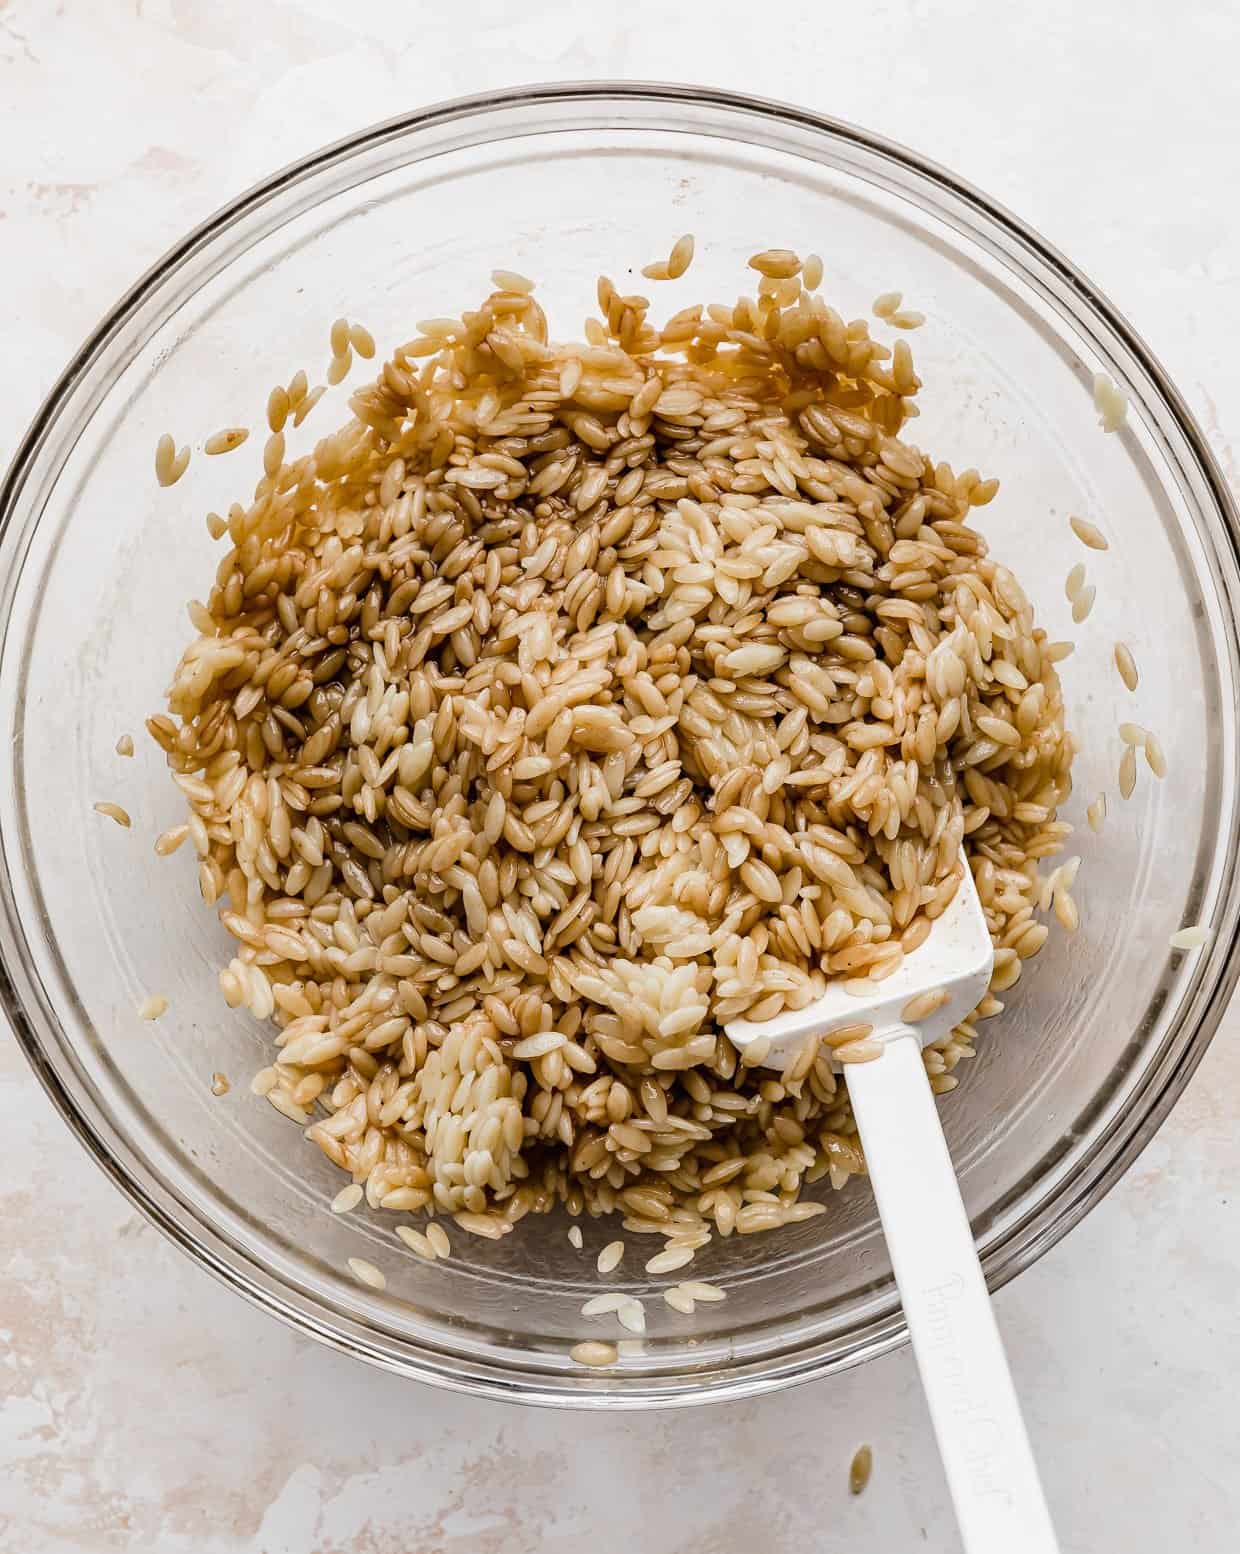 Orzo salad that has a balsamic dressing coating the noodles.